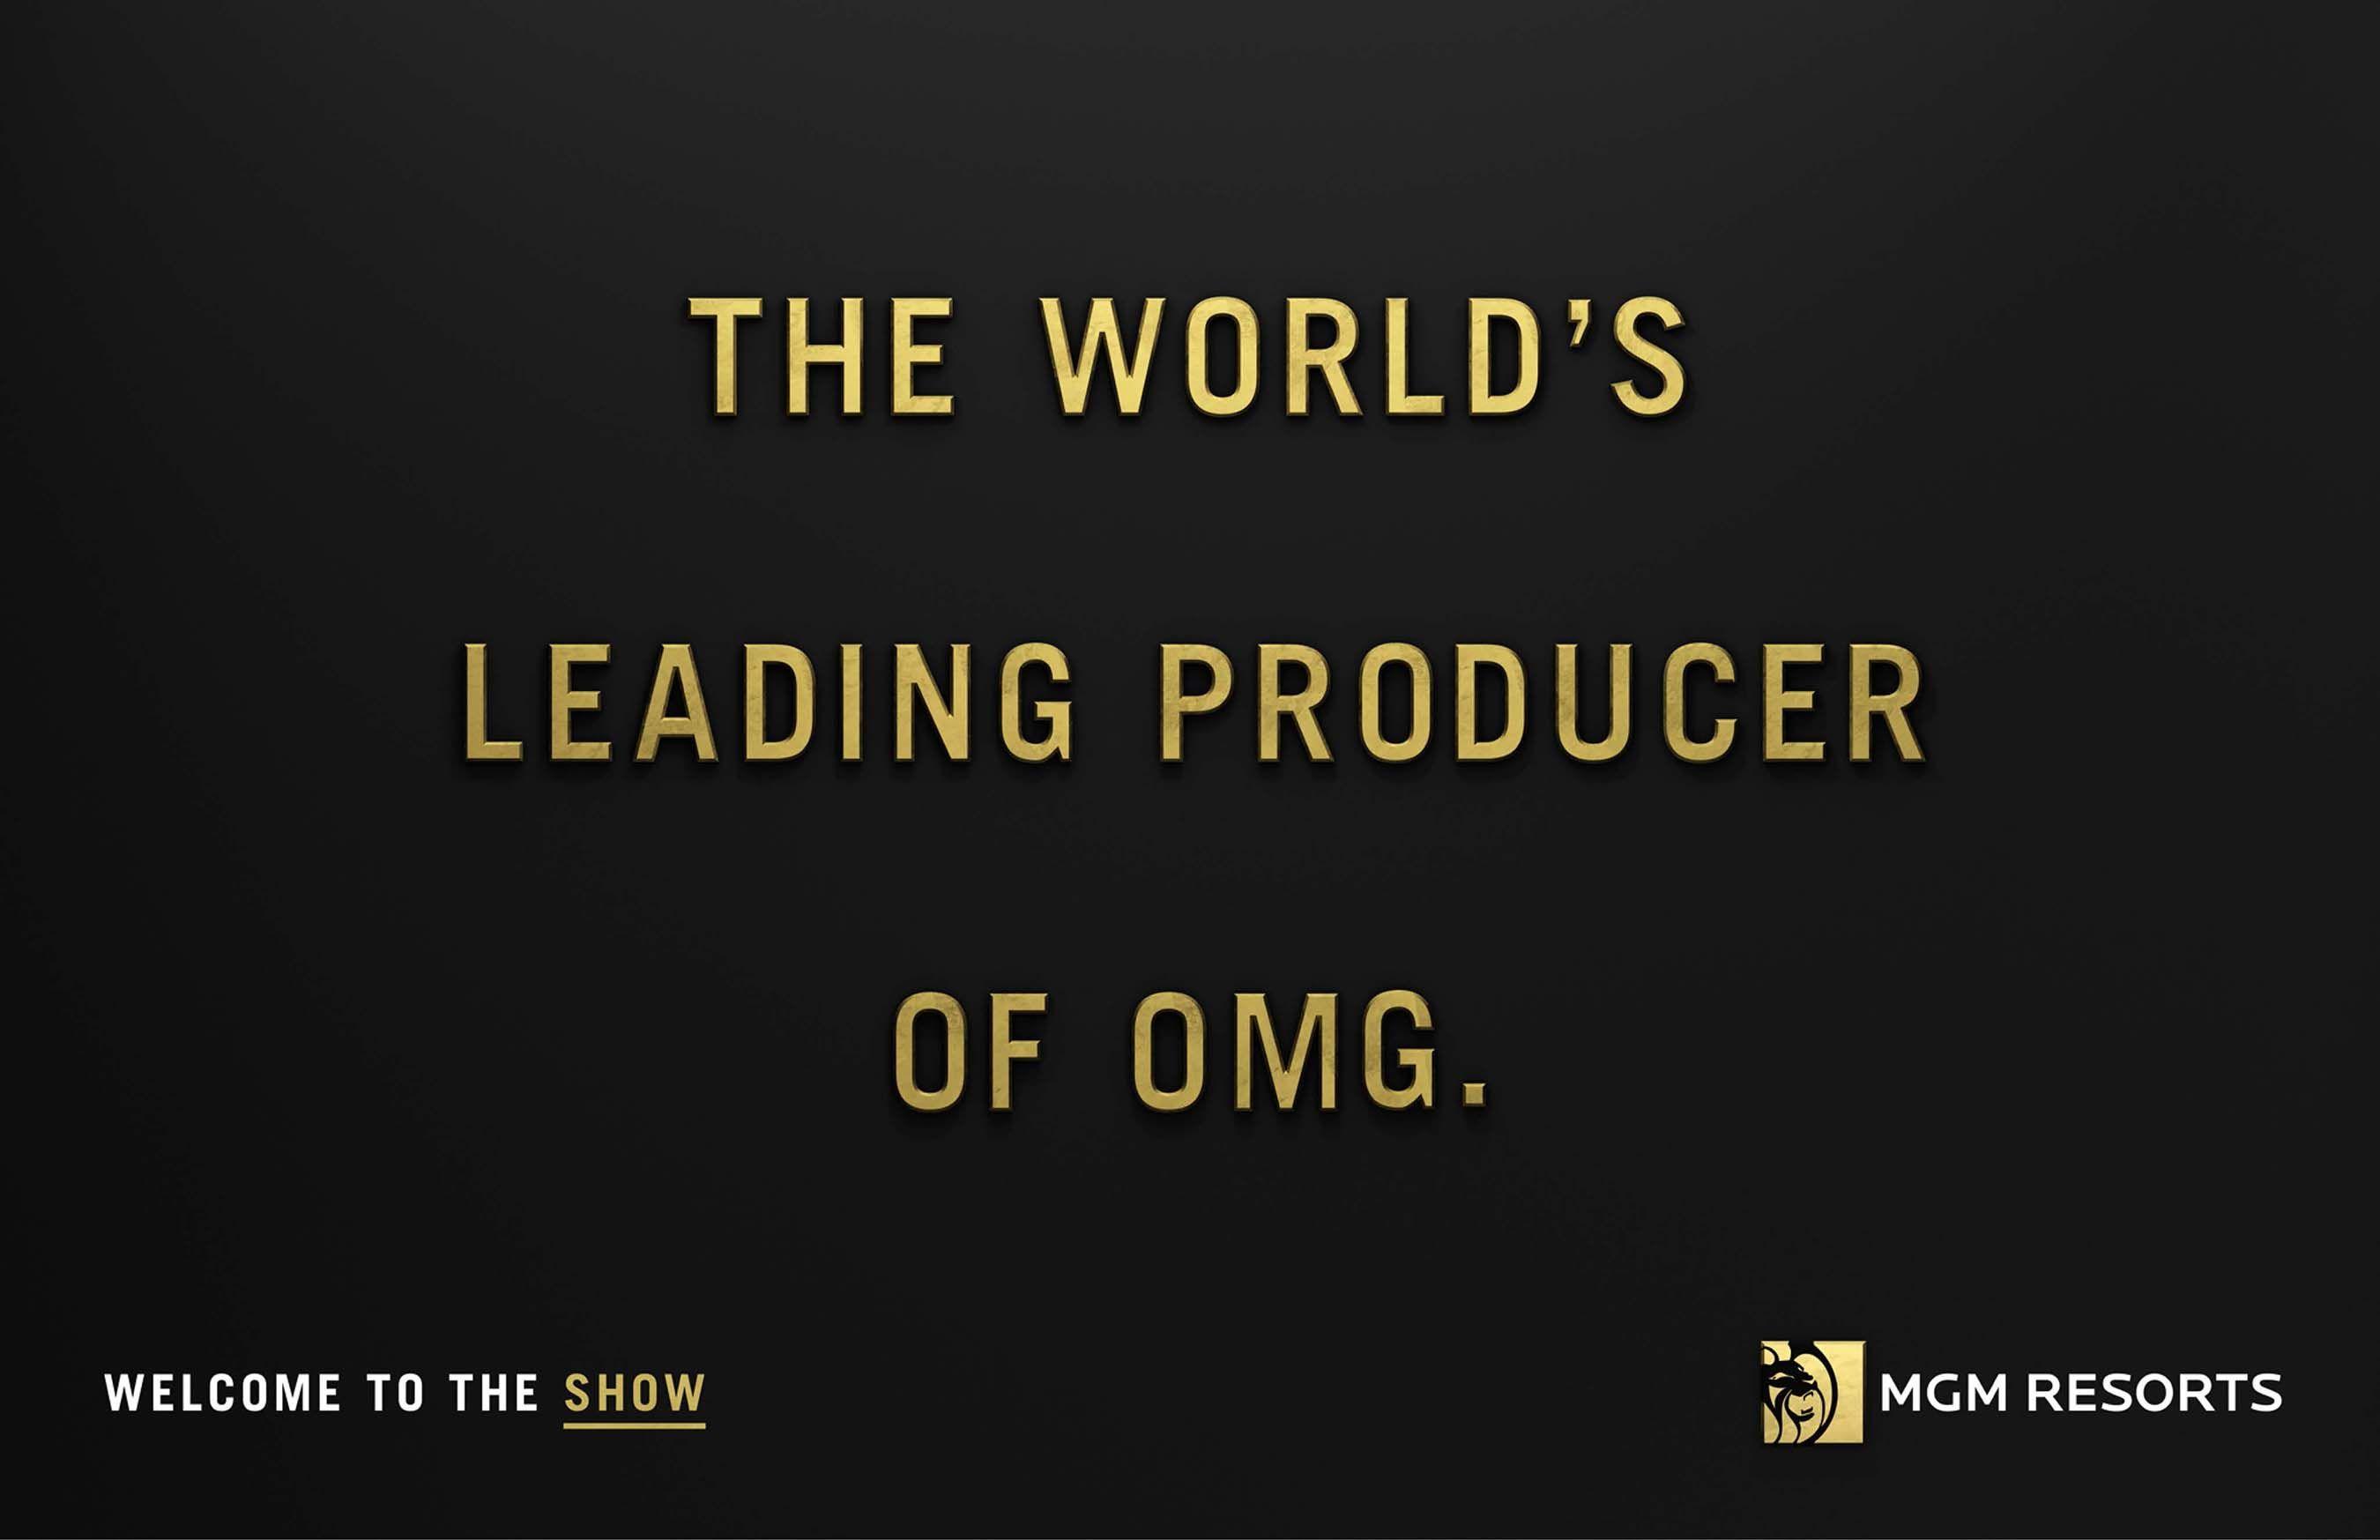 Welcome to the Show Logo - MGM Resorts Launches First Corporate Brand Campaign: 'Welcome to